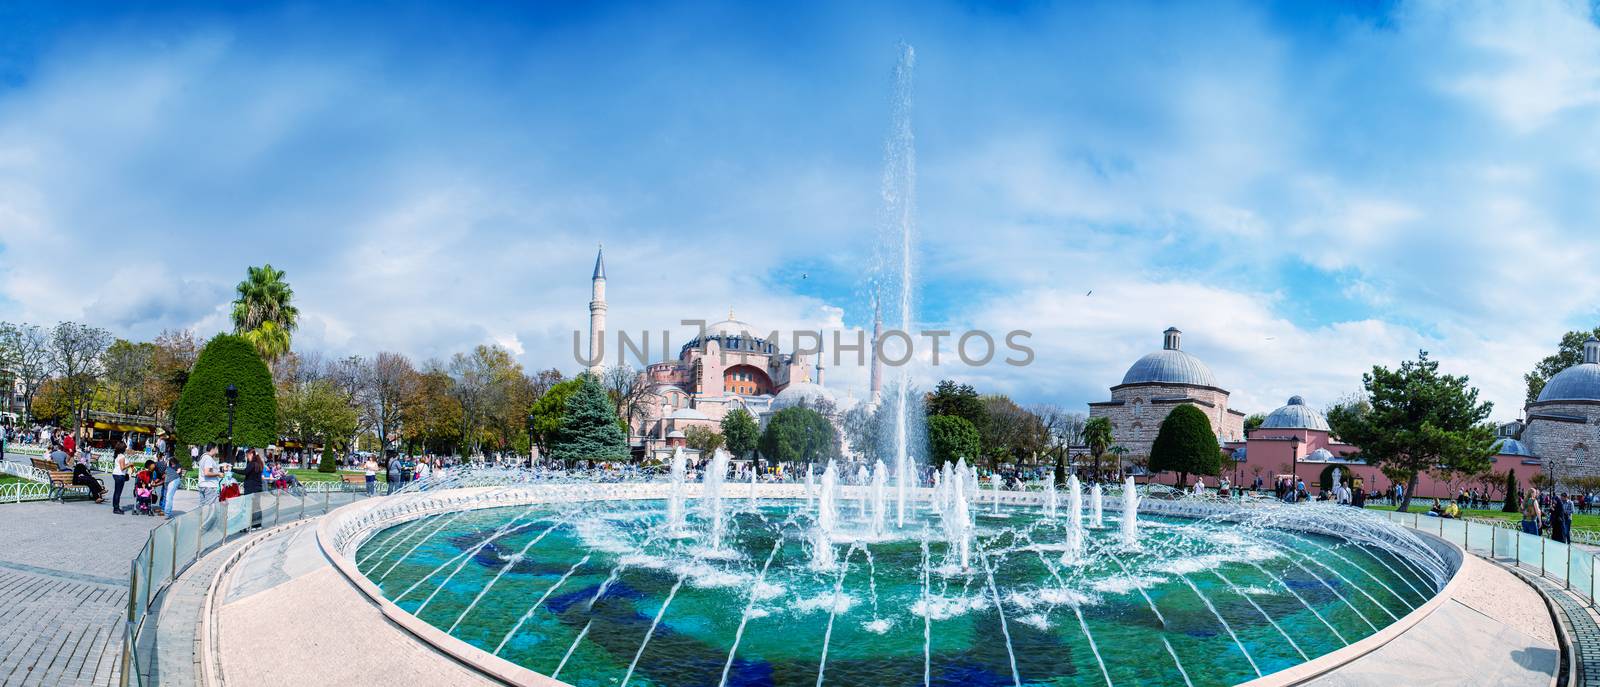 Wonderful view of Sultanahmet Square Fountain with Hagia Sophia on background - Istanbul, Turkey.